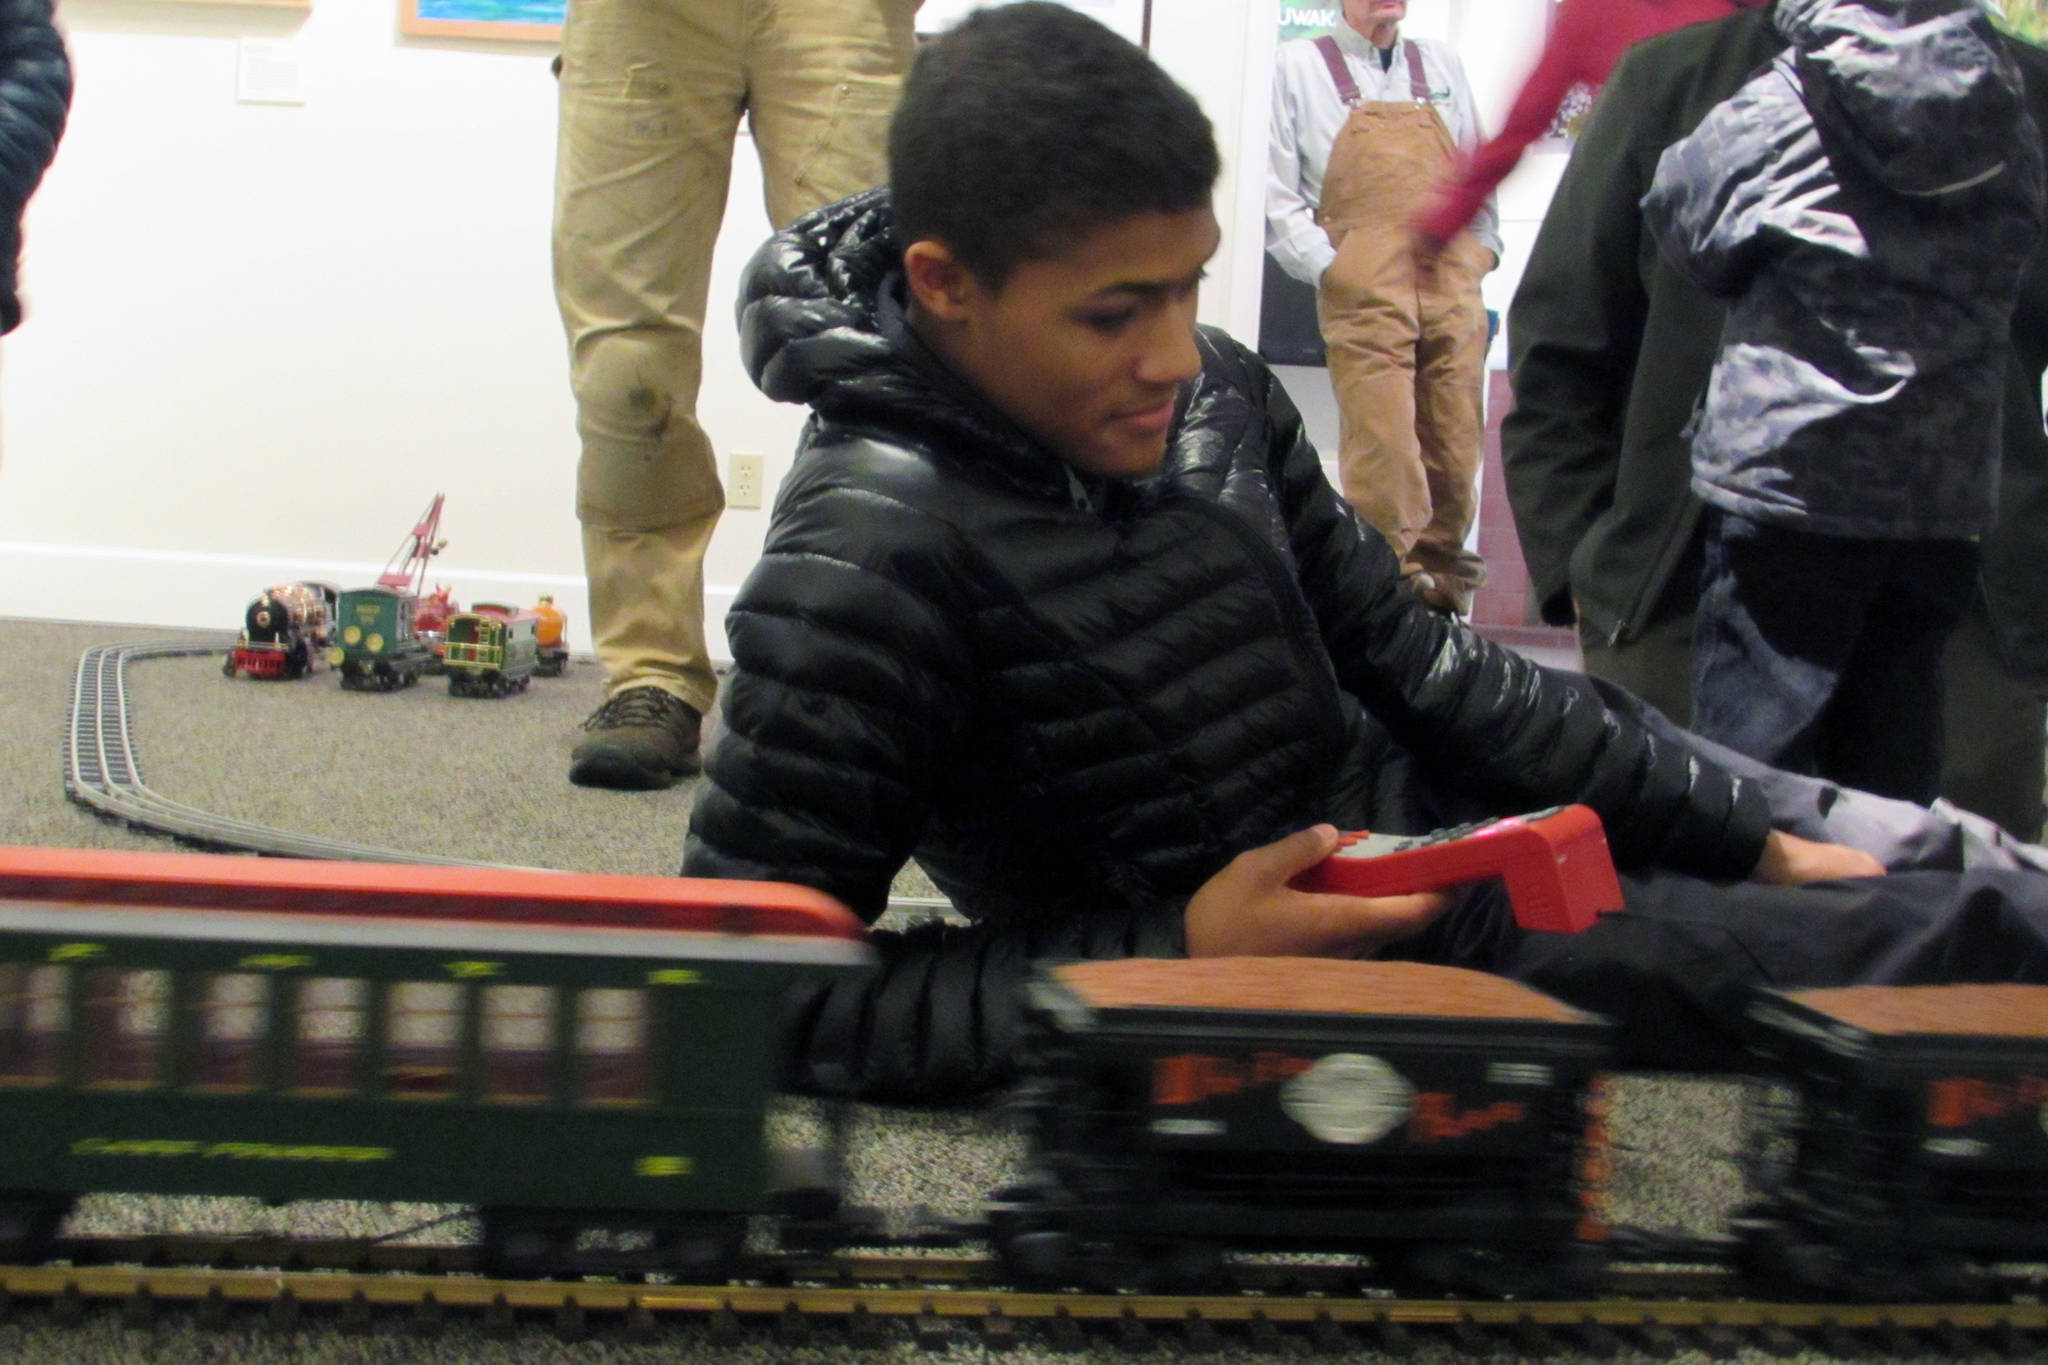 Marion McQueen IV handles the controls for a scale model of the White Pass & Yukon Route Railway train Saturday, Dec. 22, 2018 at Juneau-Douglas City Museum. (Ben Hohenstatt | Capital City Weekly)